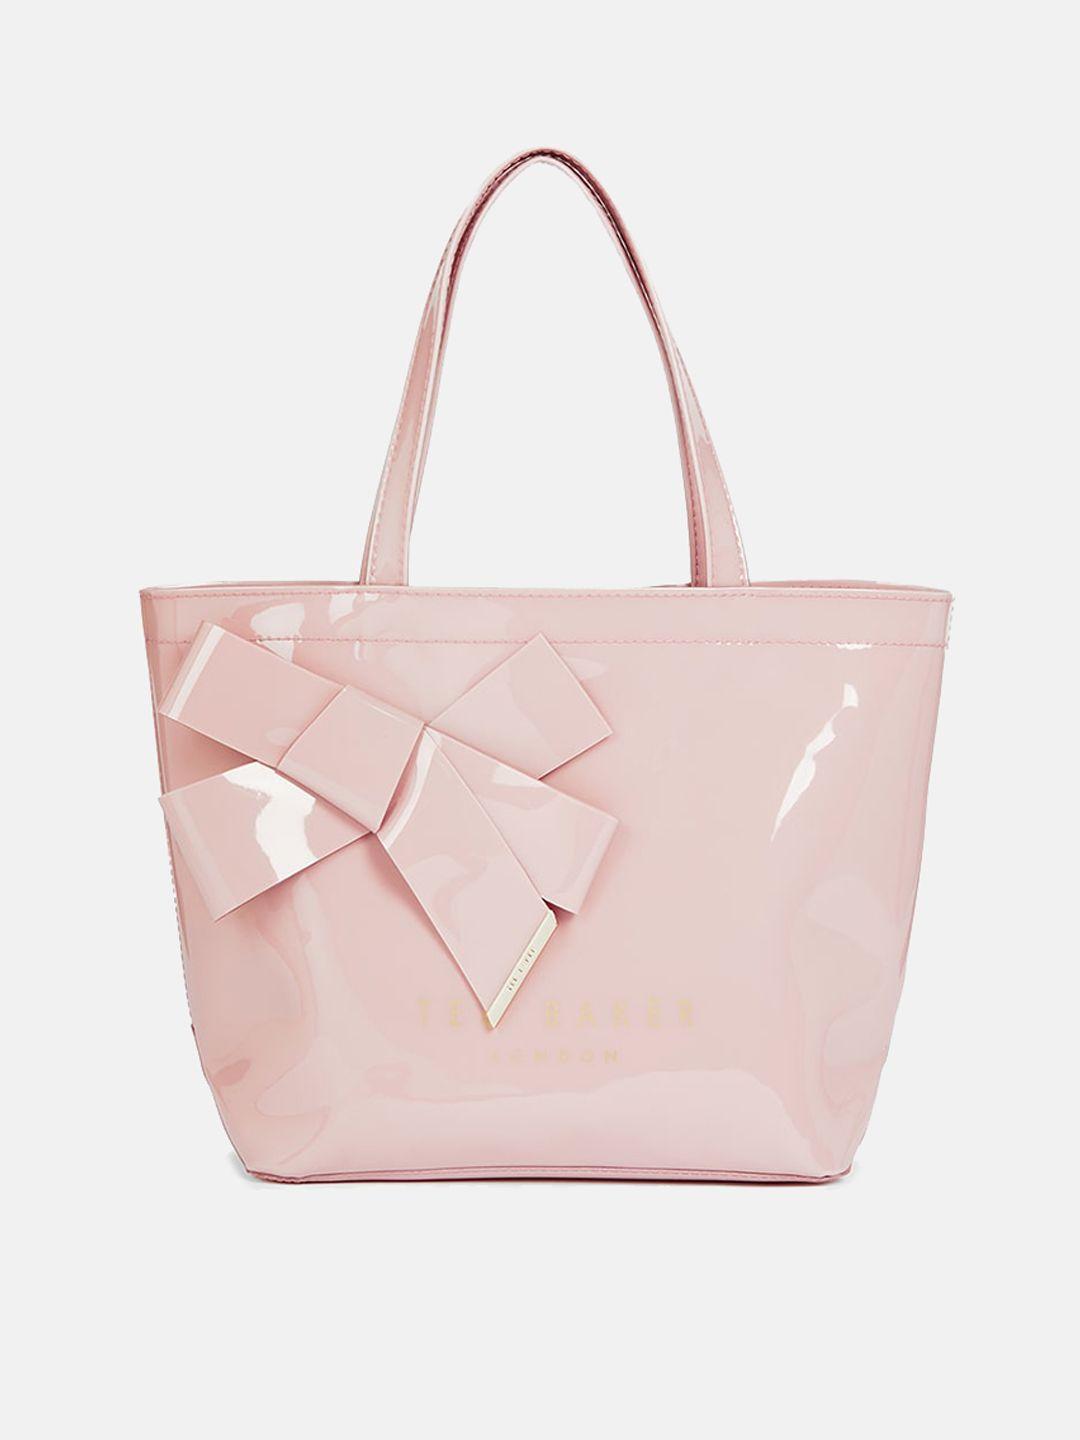 ted baker leather shopper tote bag with bow detail